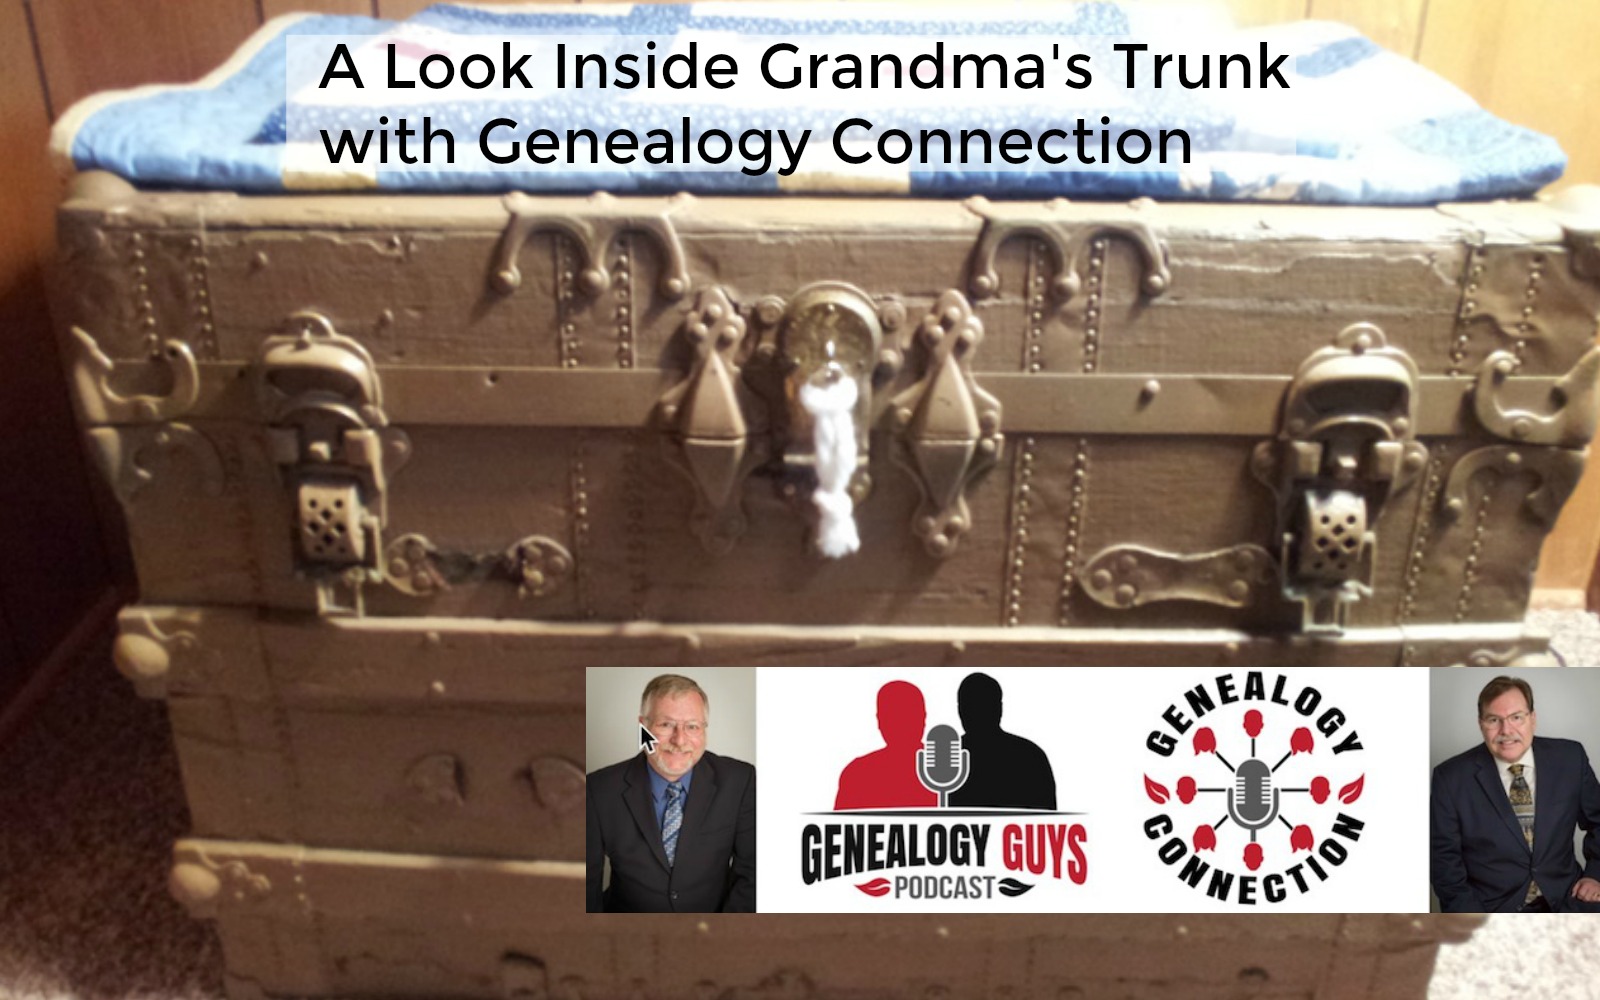 Look Inside Grandma's Trunk with Genealogy Connection